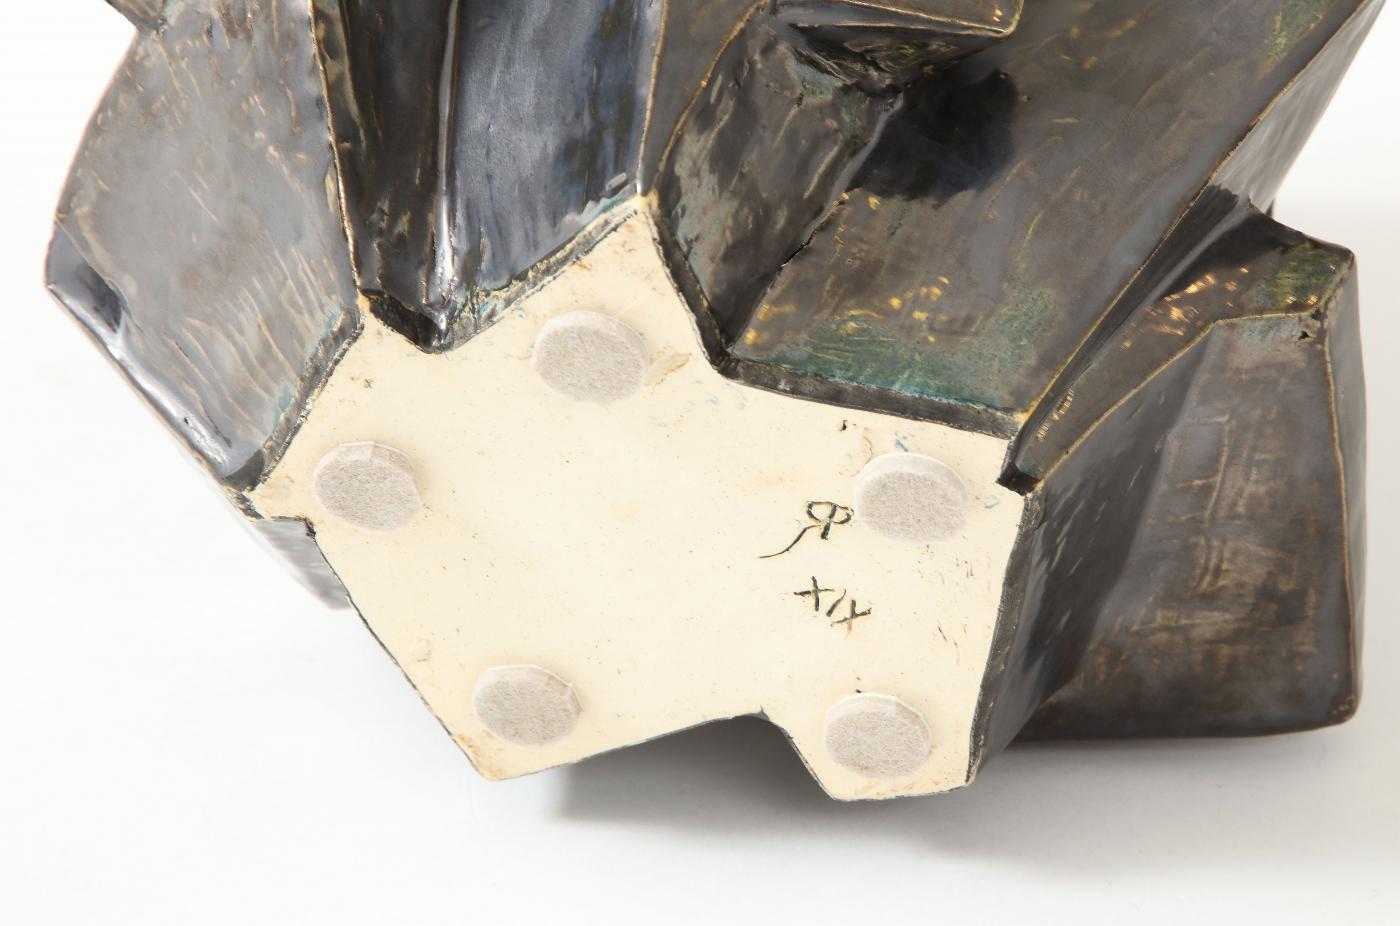 An R.A Pesce wheel-thrown cubist vessel in white stoneware